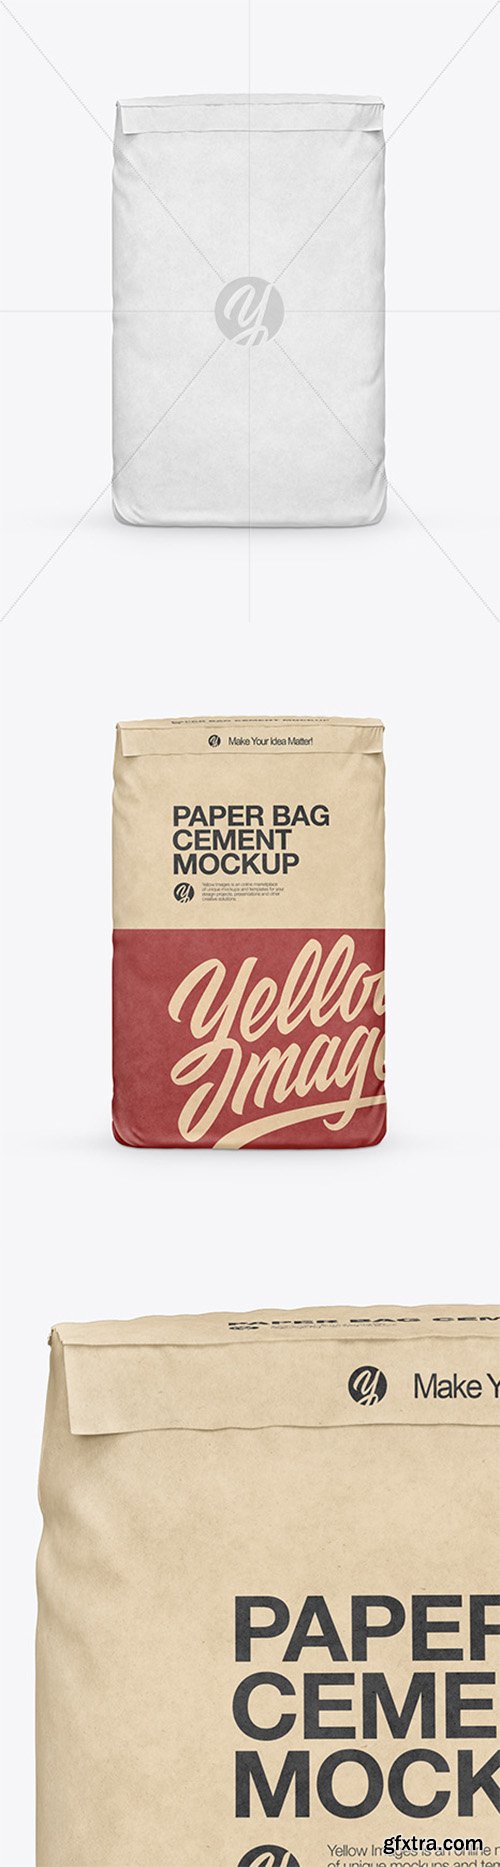 48 Karft Paper Bag Label Yellowimages